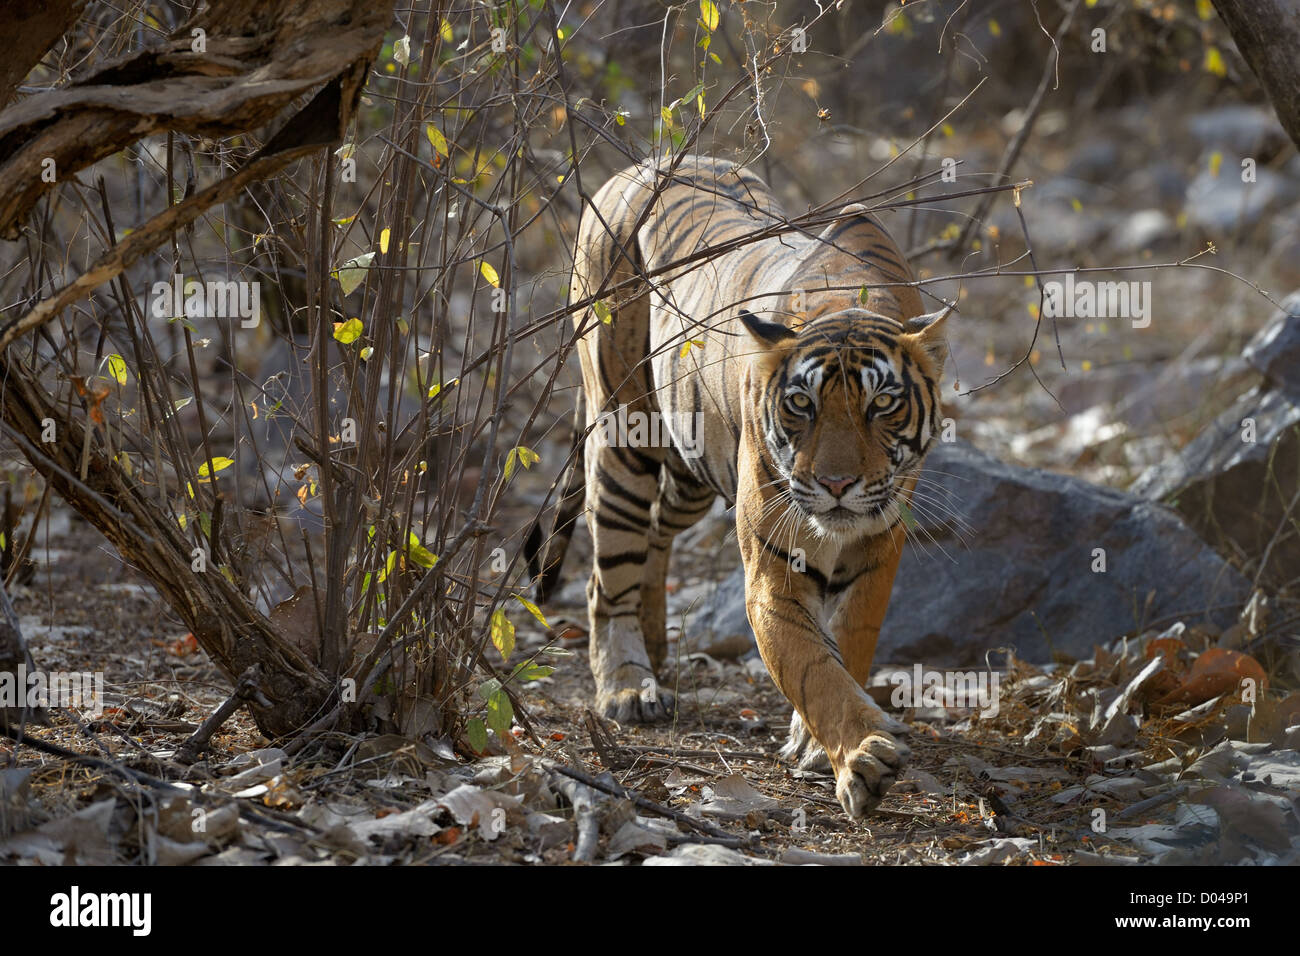 Bengal Tiger walking in dry forest. Stock Photo